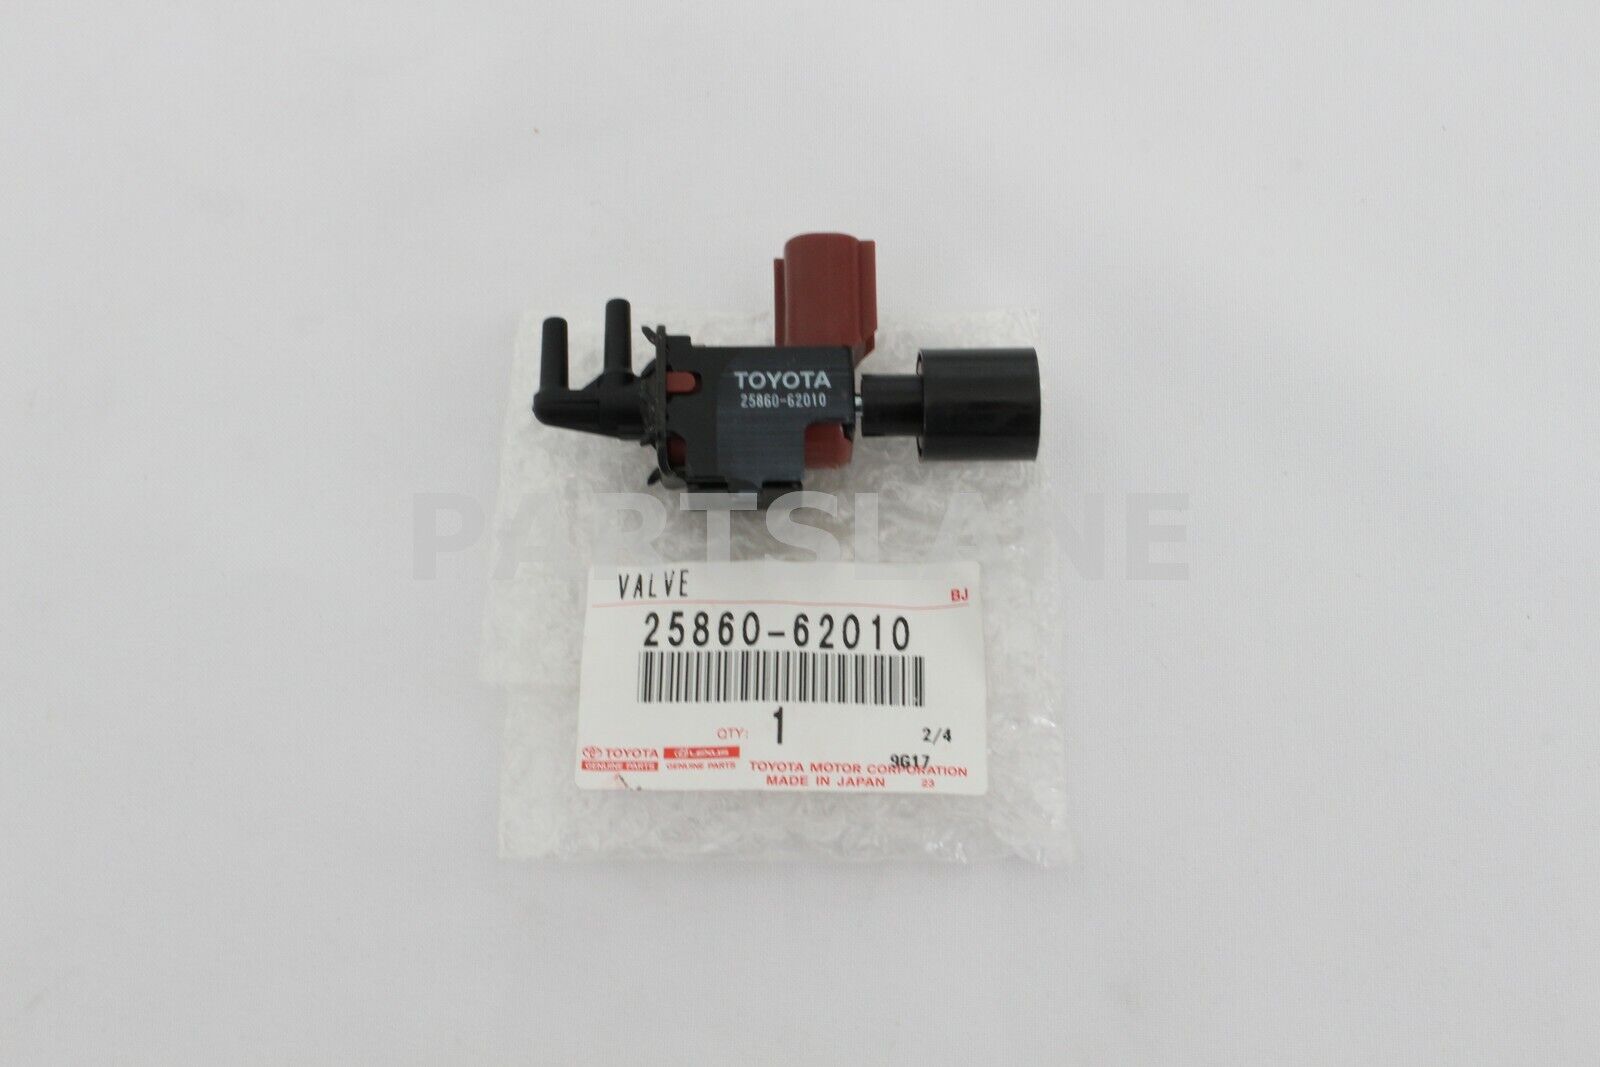 TOYOTA GENUINE CAMRY LEXUS New arrival ES300 VACUUM ASSEMBLY VALVE Max 84% OFF SWITCHING